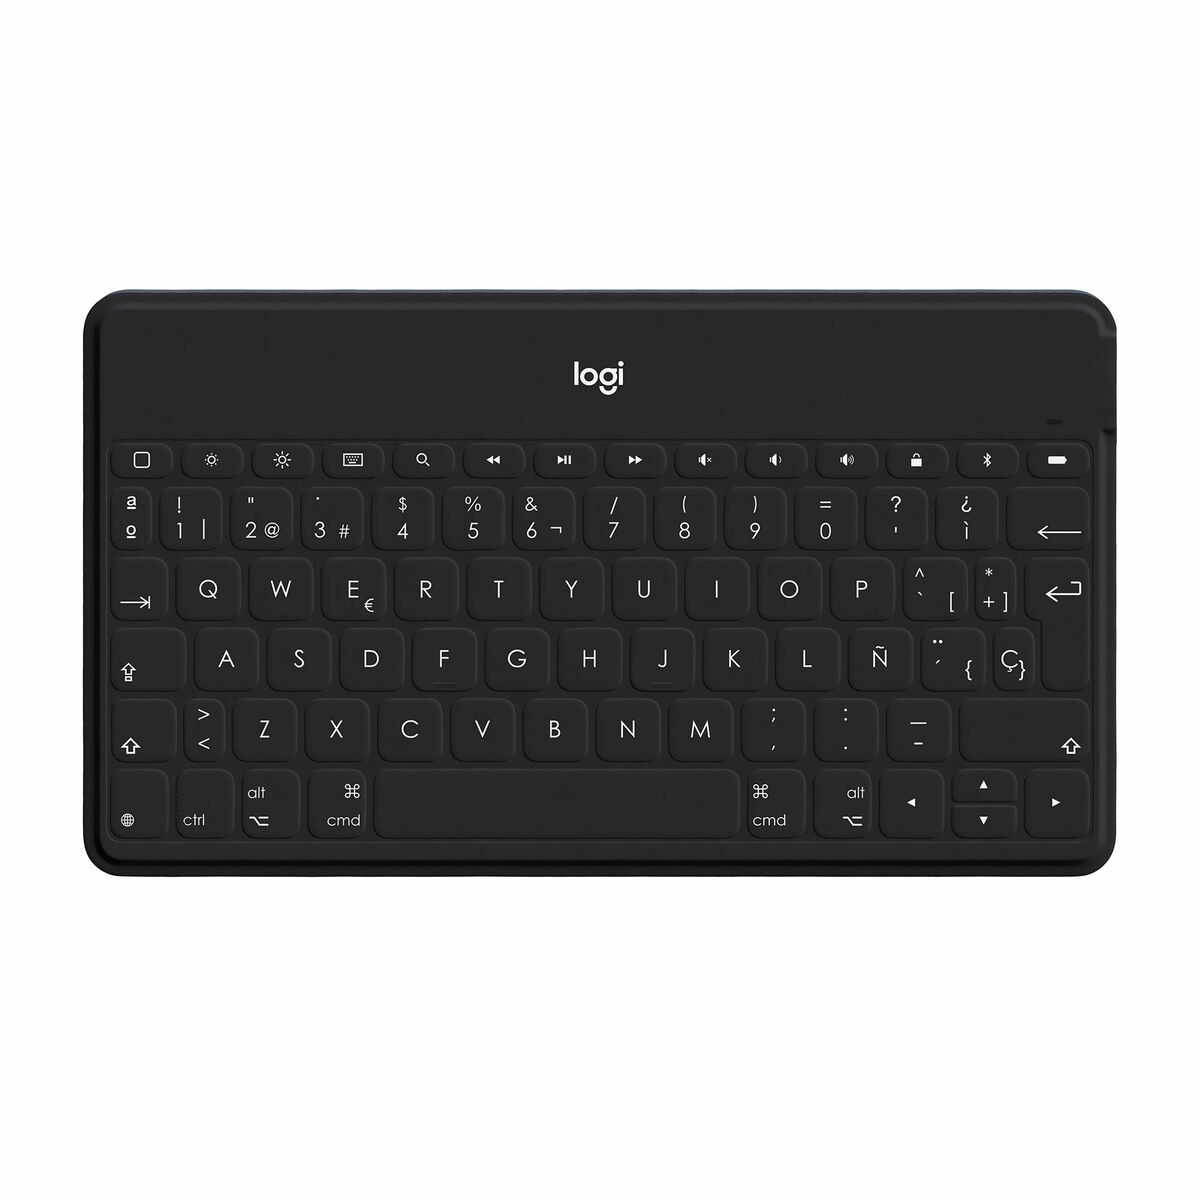 Bluetooth Keyboard with Support for Tablet Logitech Black (Refurbished D)